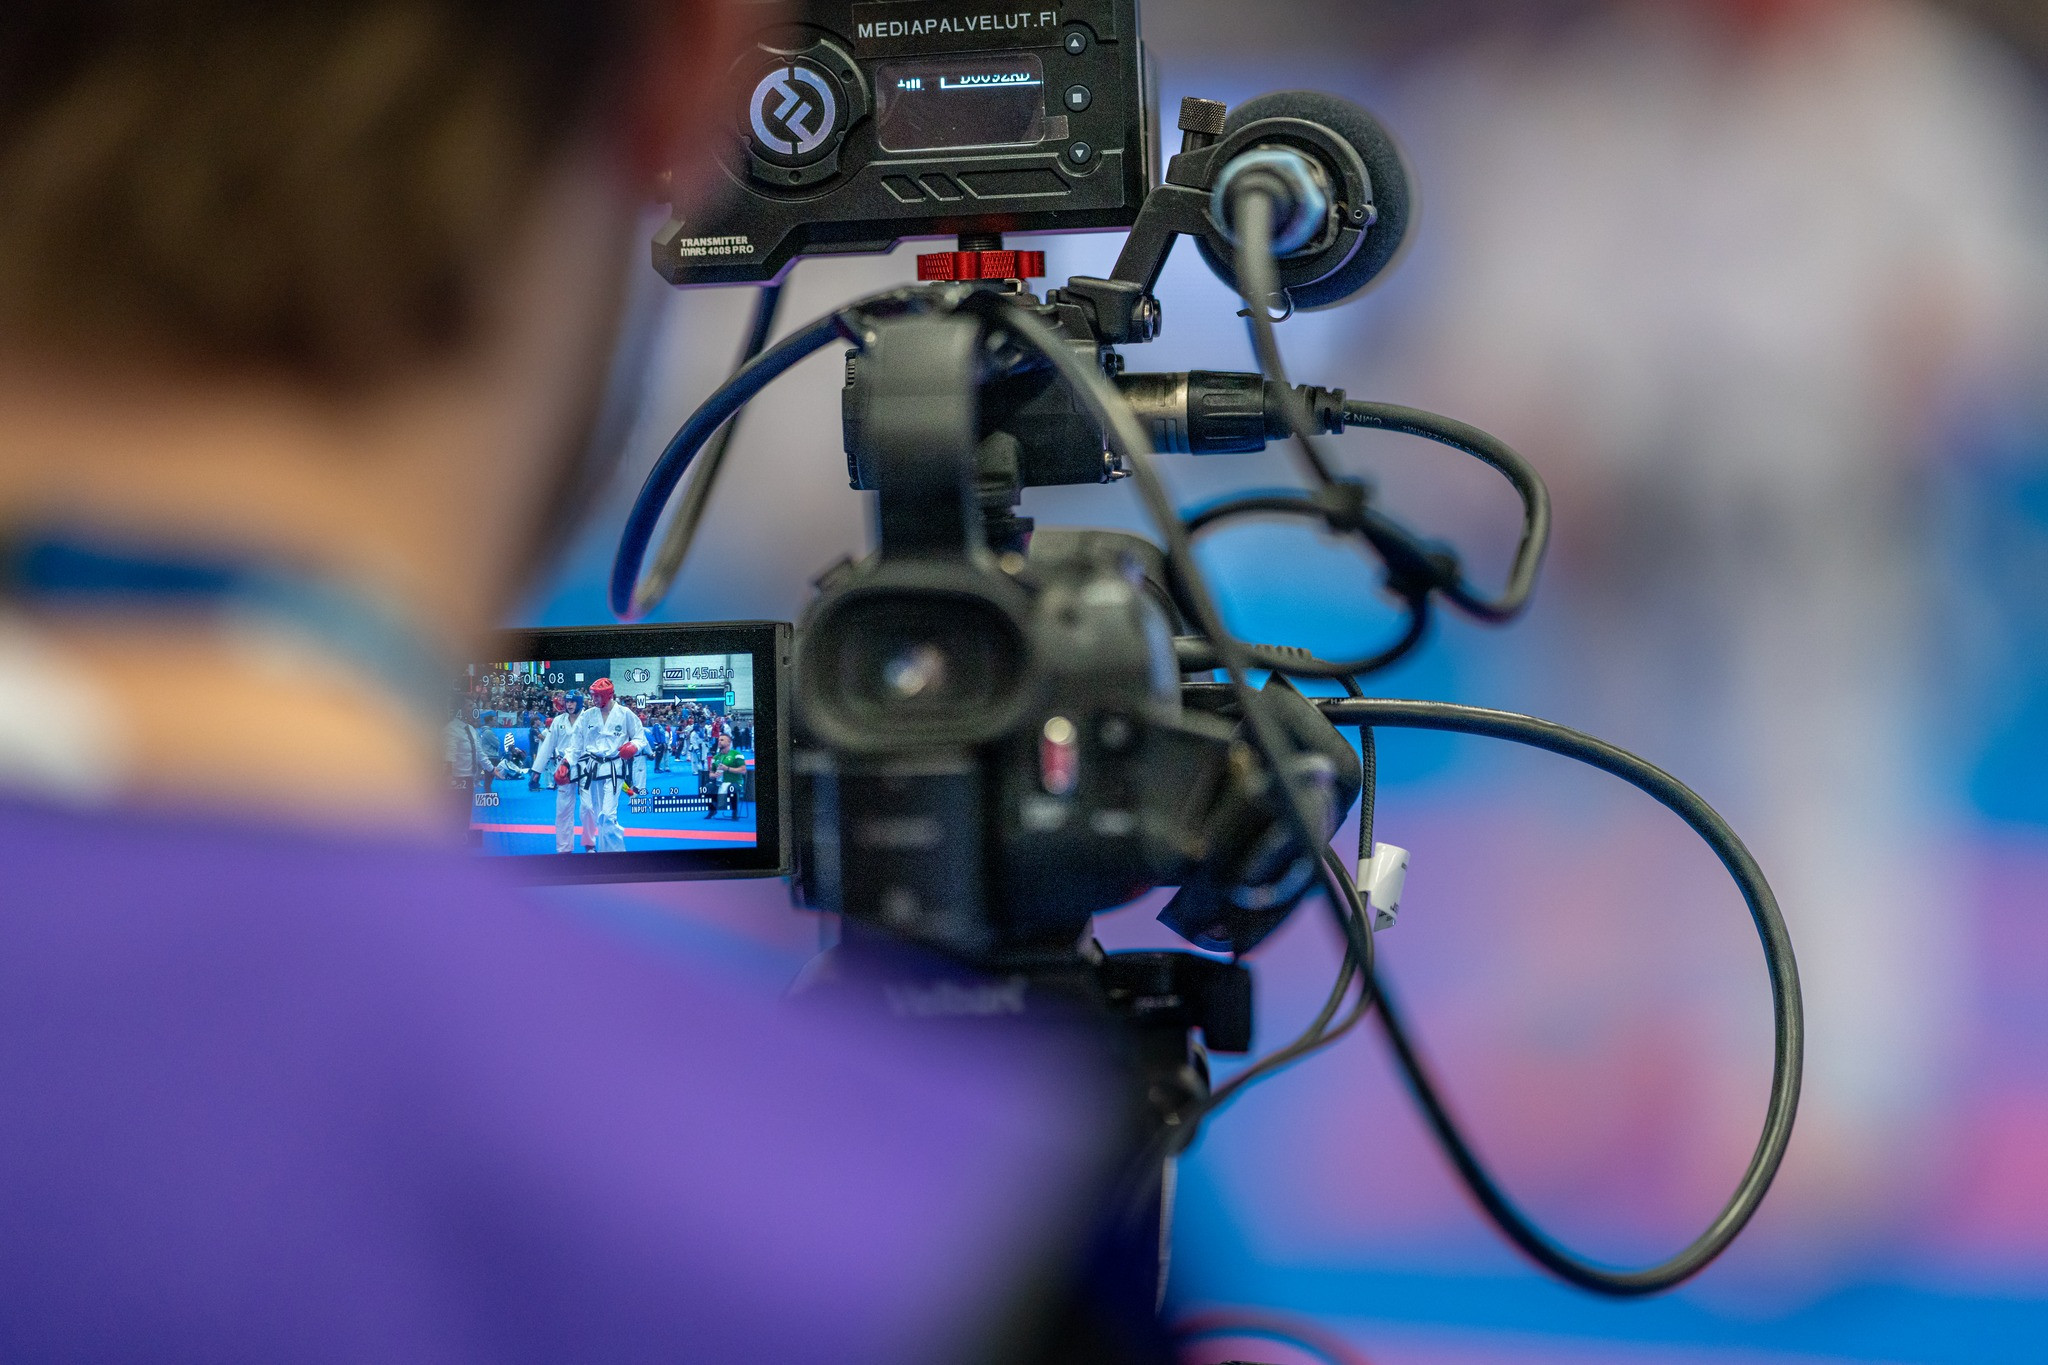 The ITF World Championships is being live streamed on YouTube, with more than 140,000 views reported for the first day ©Olli Leino/ITF World Championships 2023